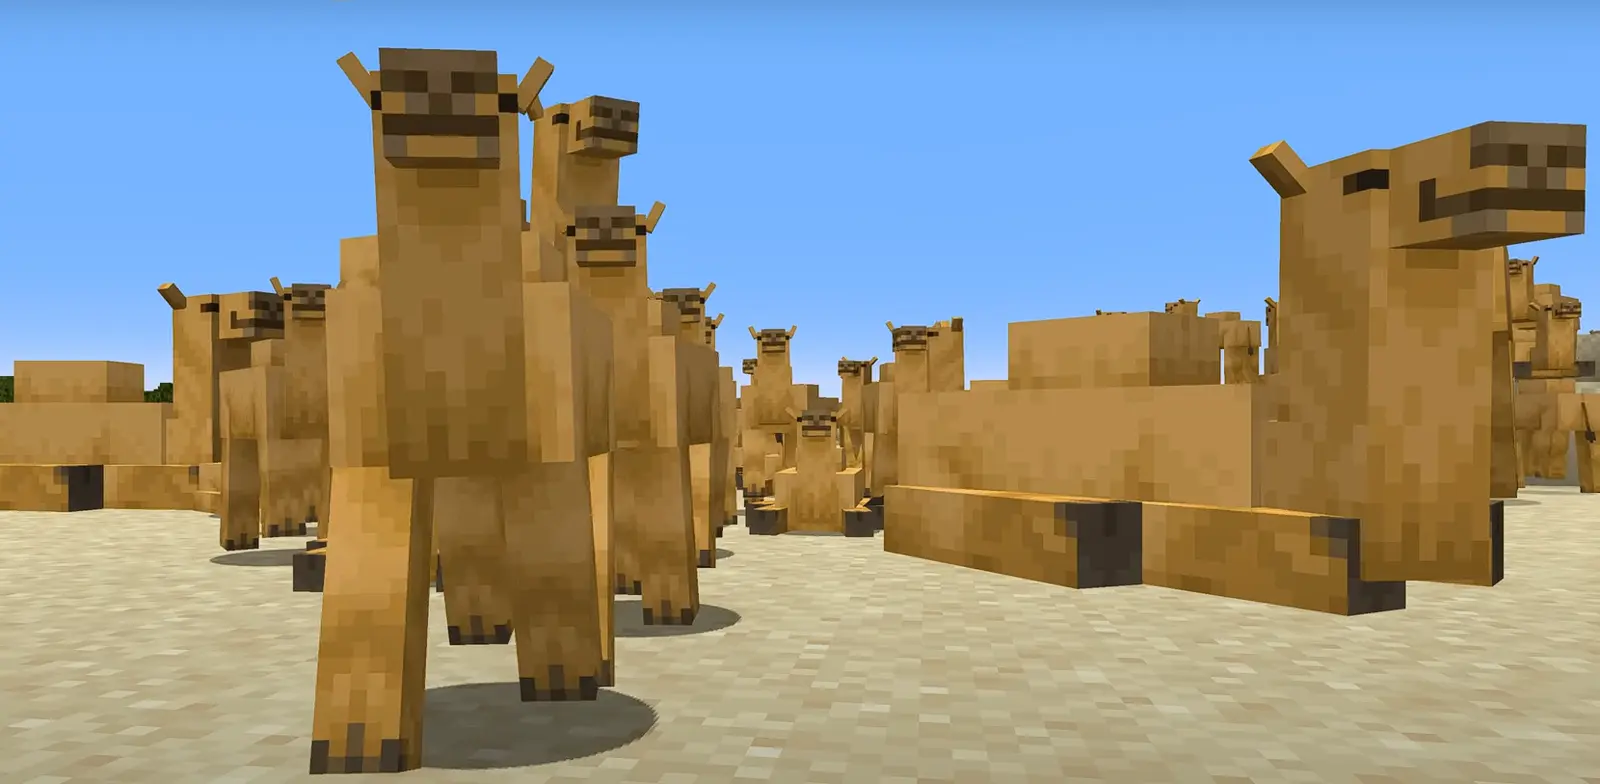 Secret powers of Camels you probably didn't know existed in Minecraft